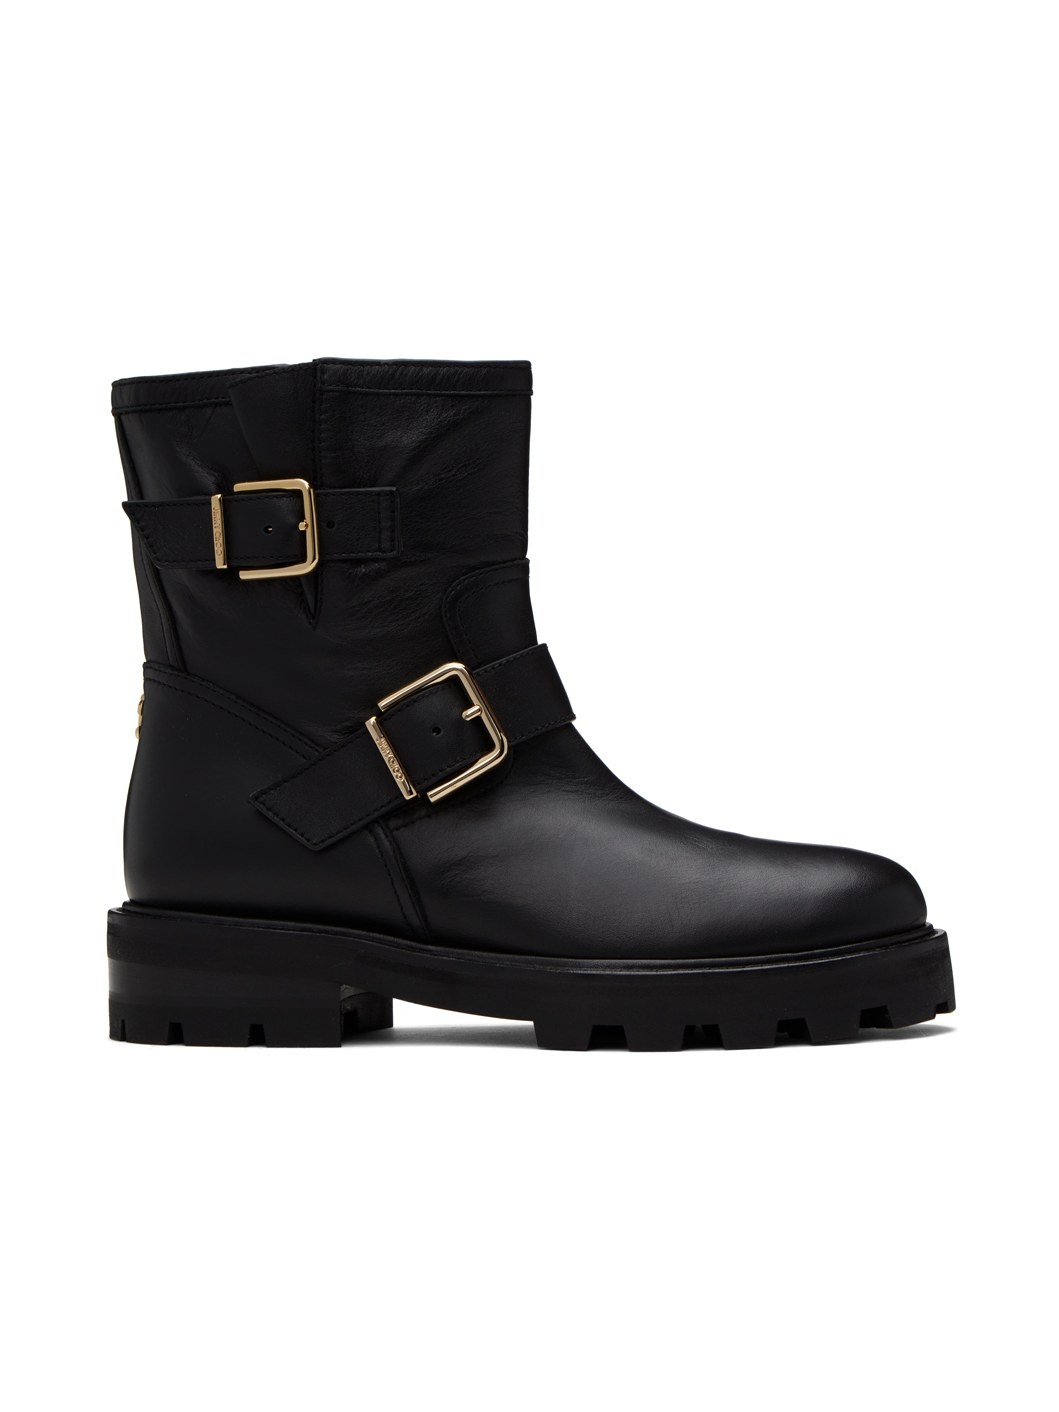 Black Youth II Boots - 1